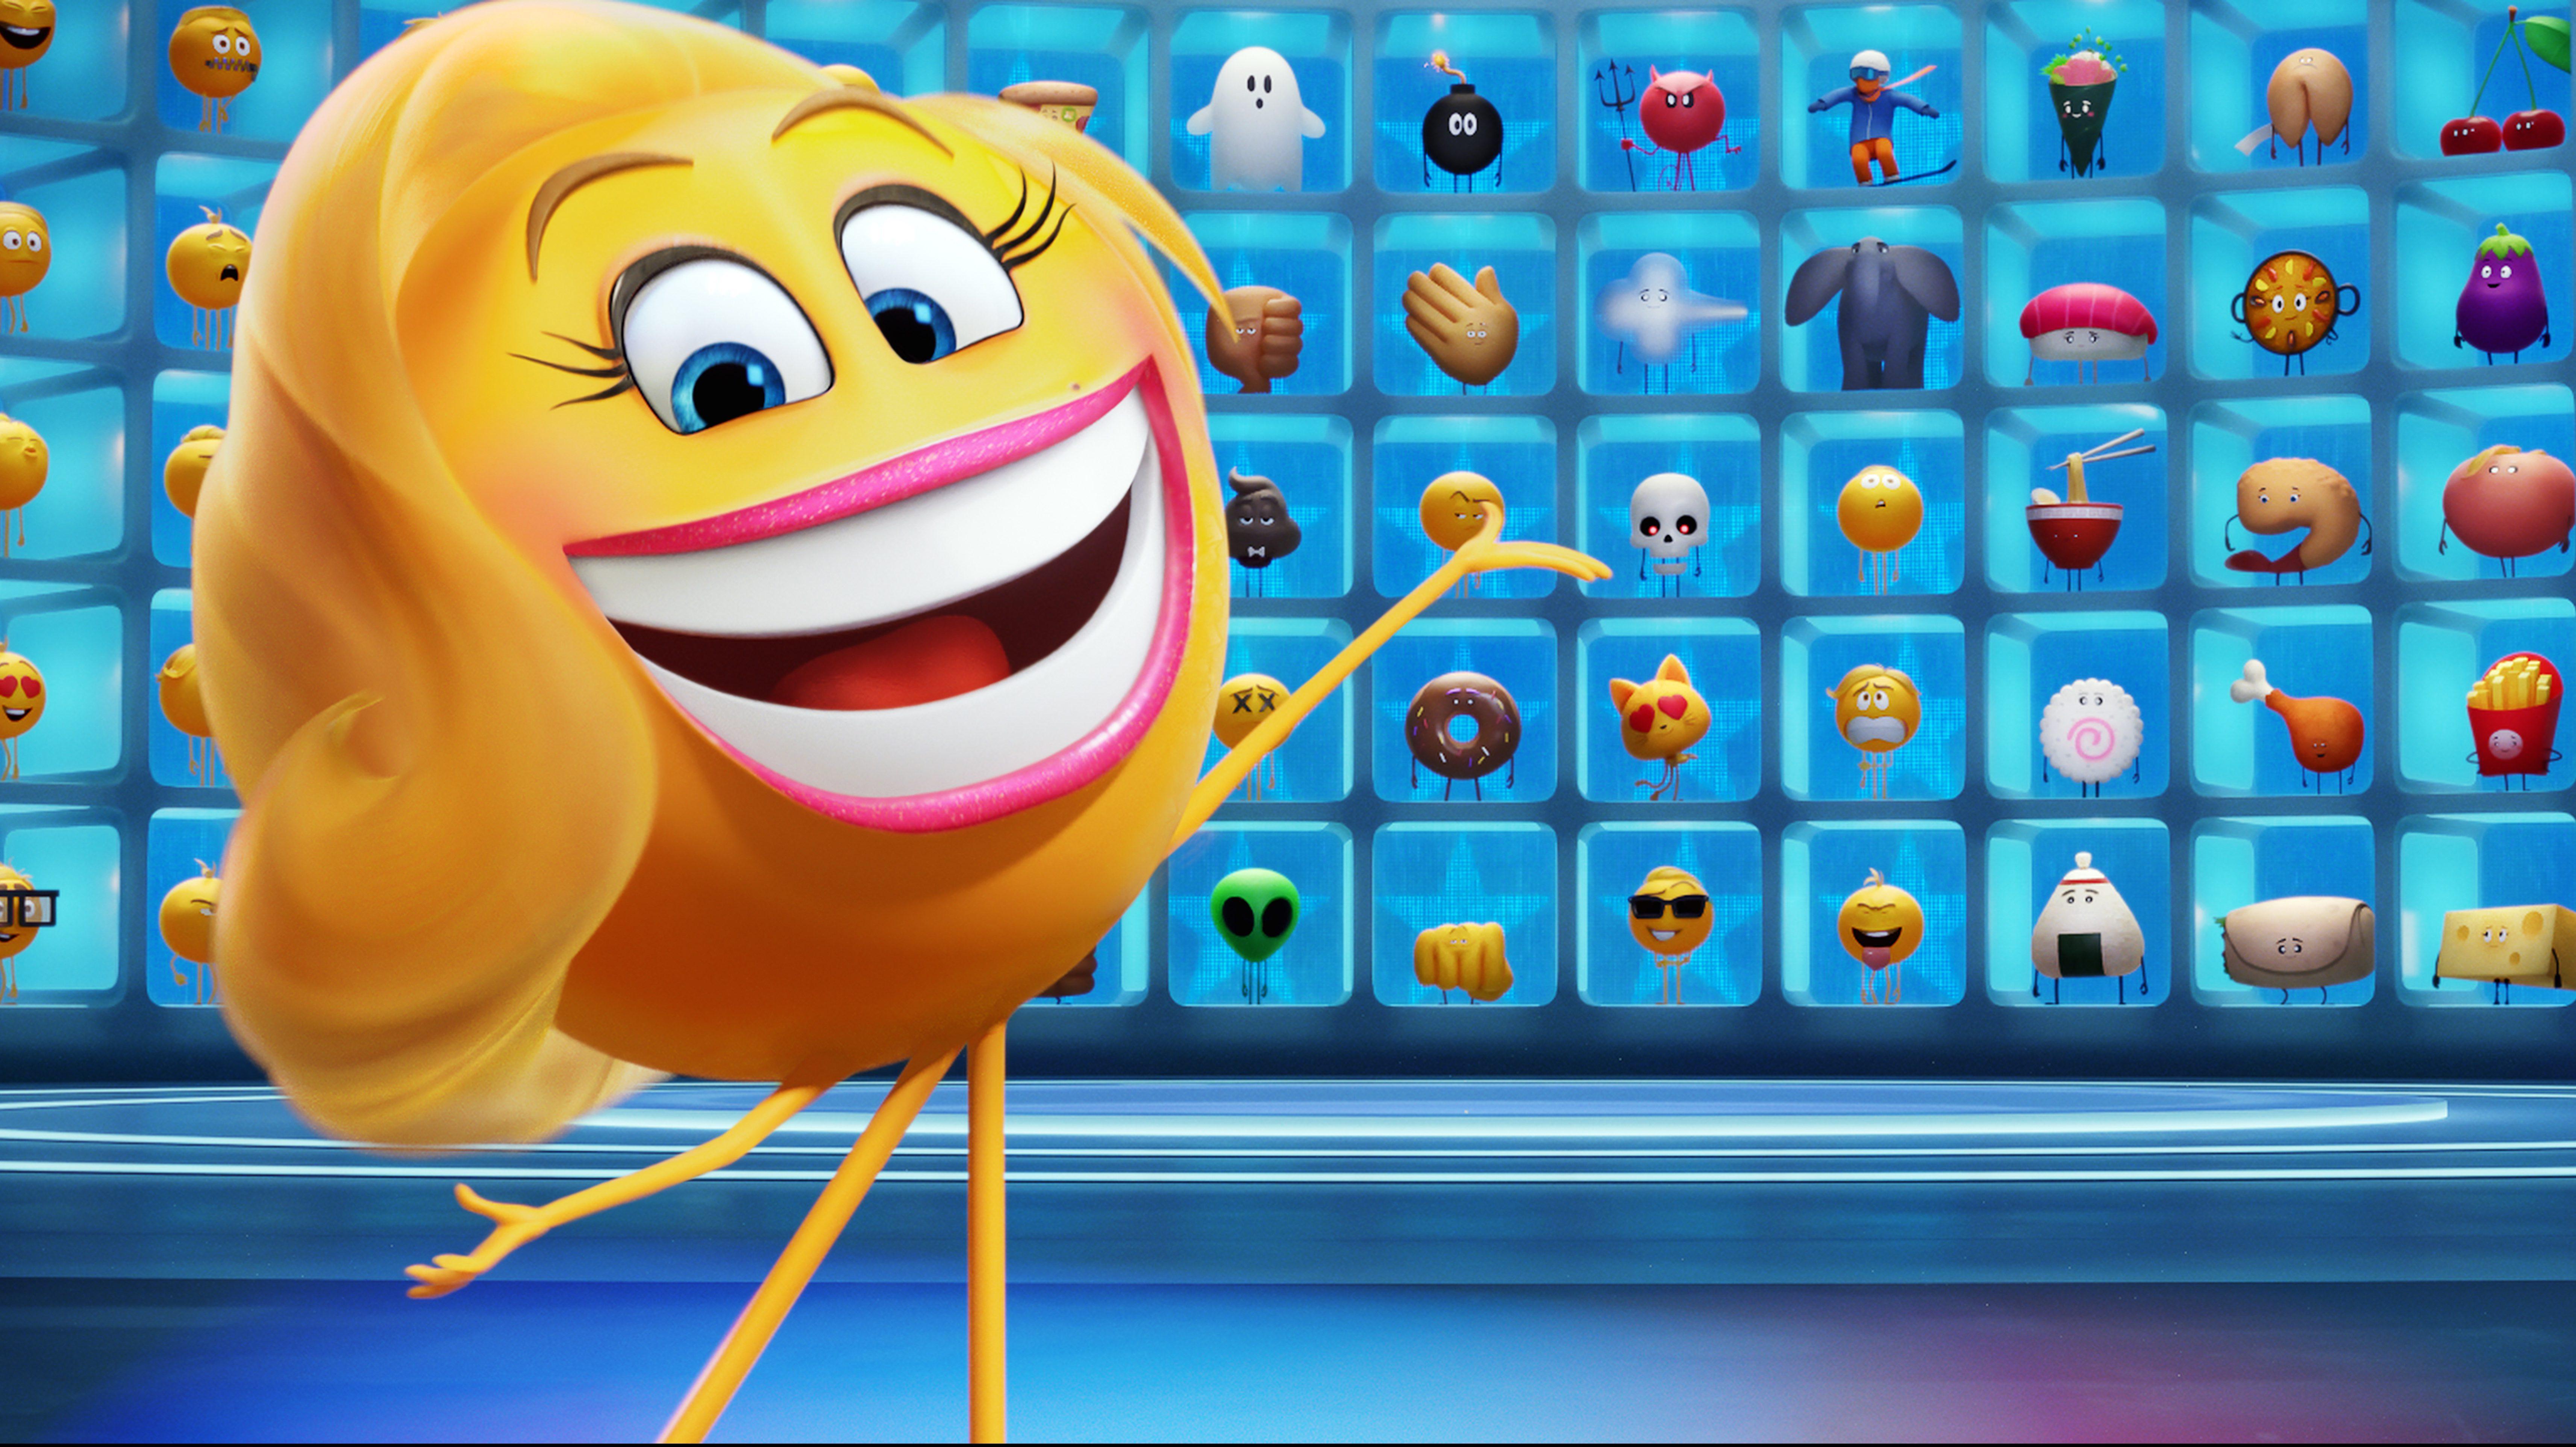 HD wallpaper, Animated Movies Wallpapers, Hd Wallpapers, The Emoji Movie Wallpapers, Movies Wallpapers, 4K Wallpapers, 2017 Movies Wallpapers, Emojimovie Express Yourself Wallpapers, The Emoji Movie 2017